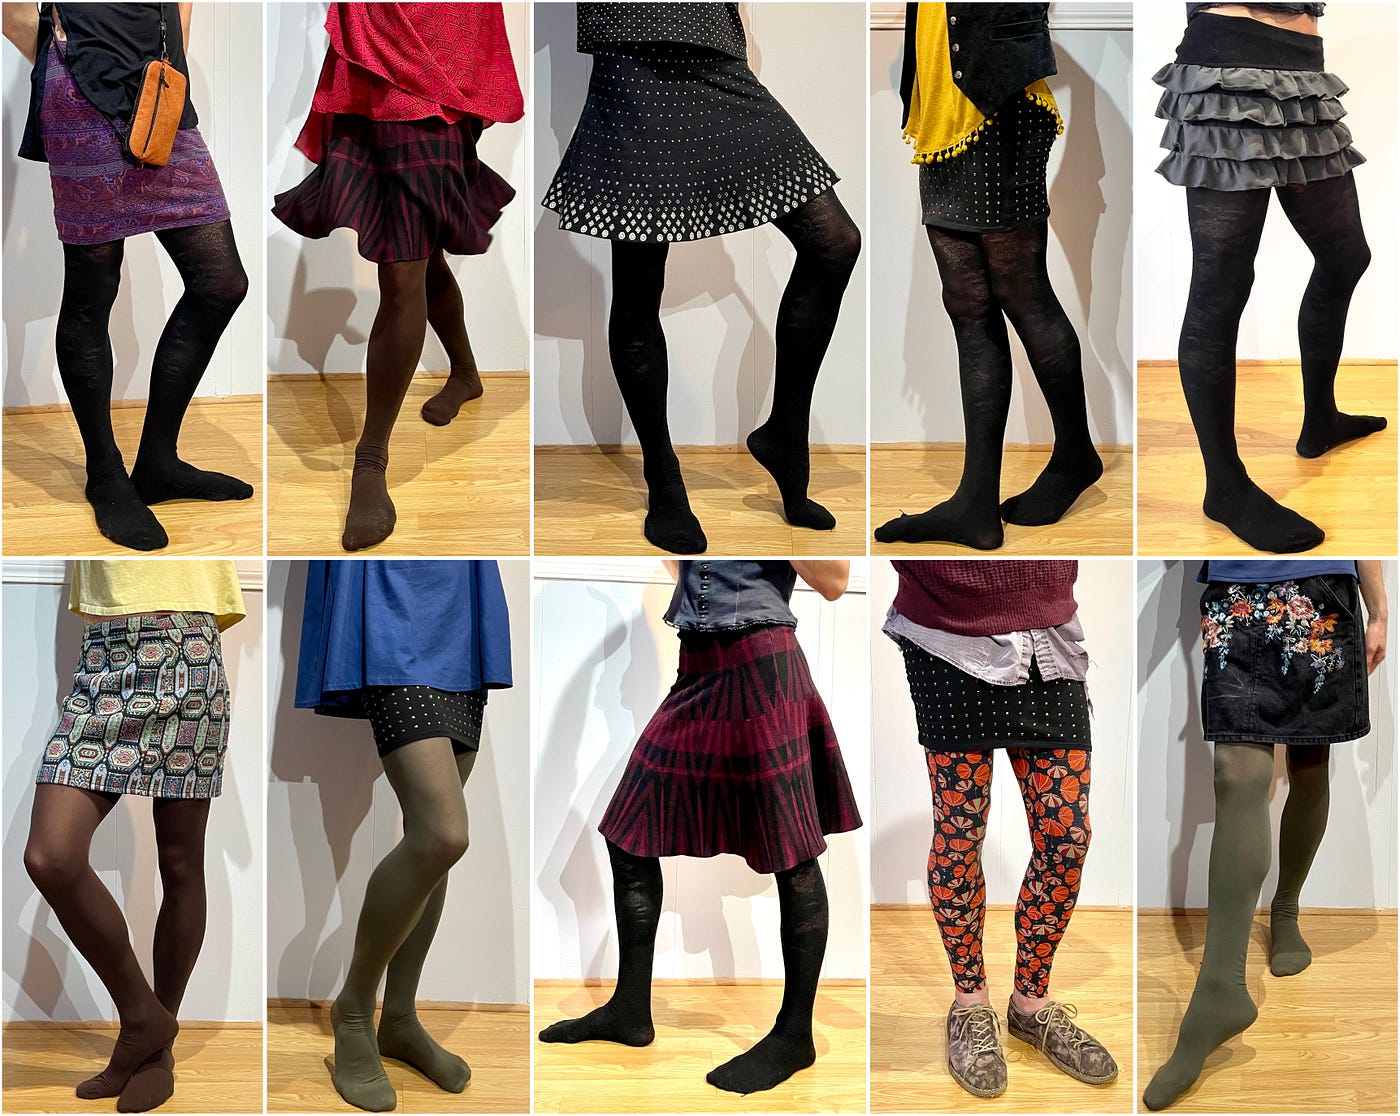 My Journey into Skirts… and other “fem” things